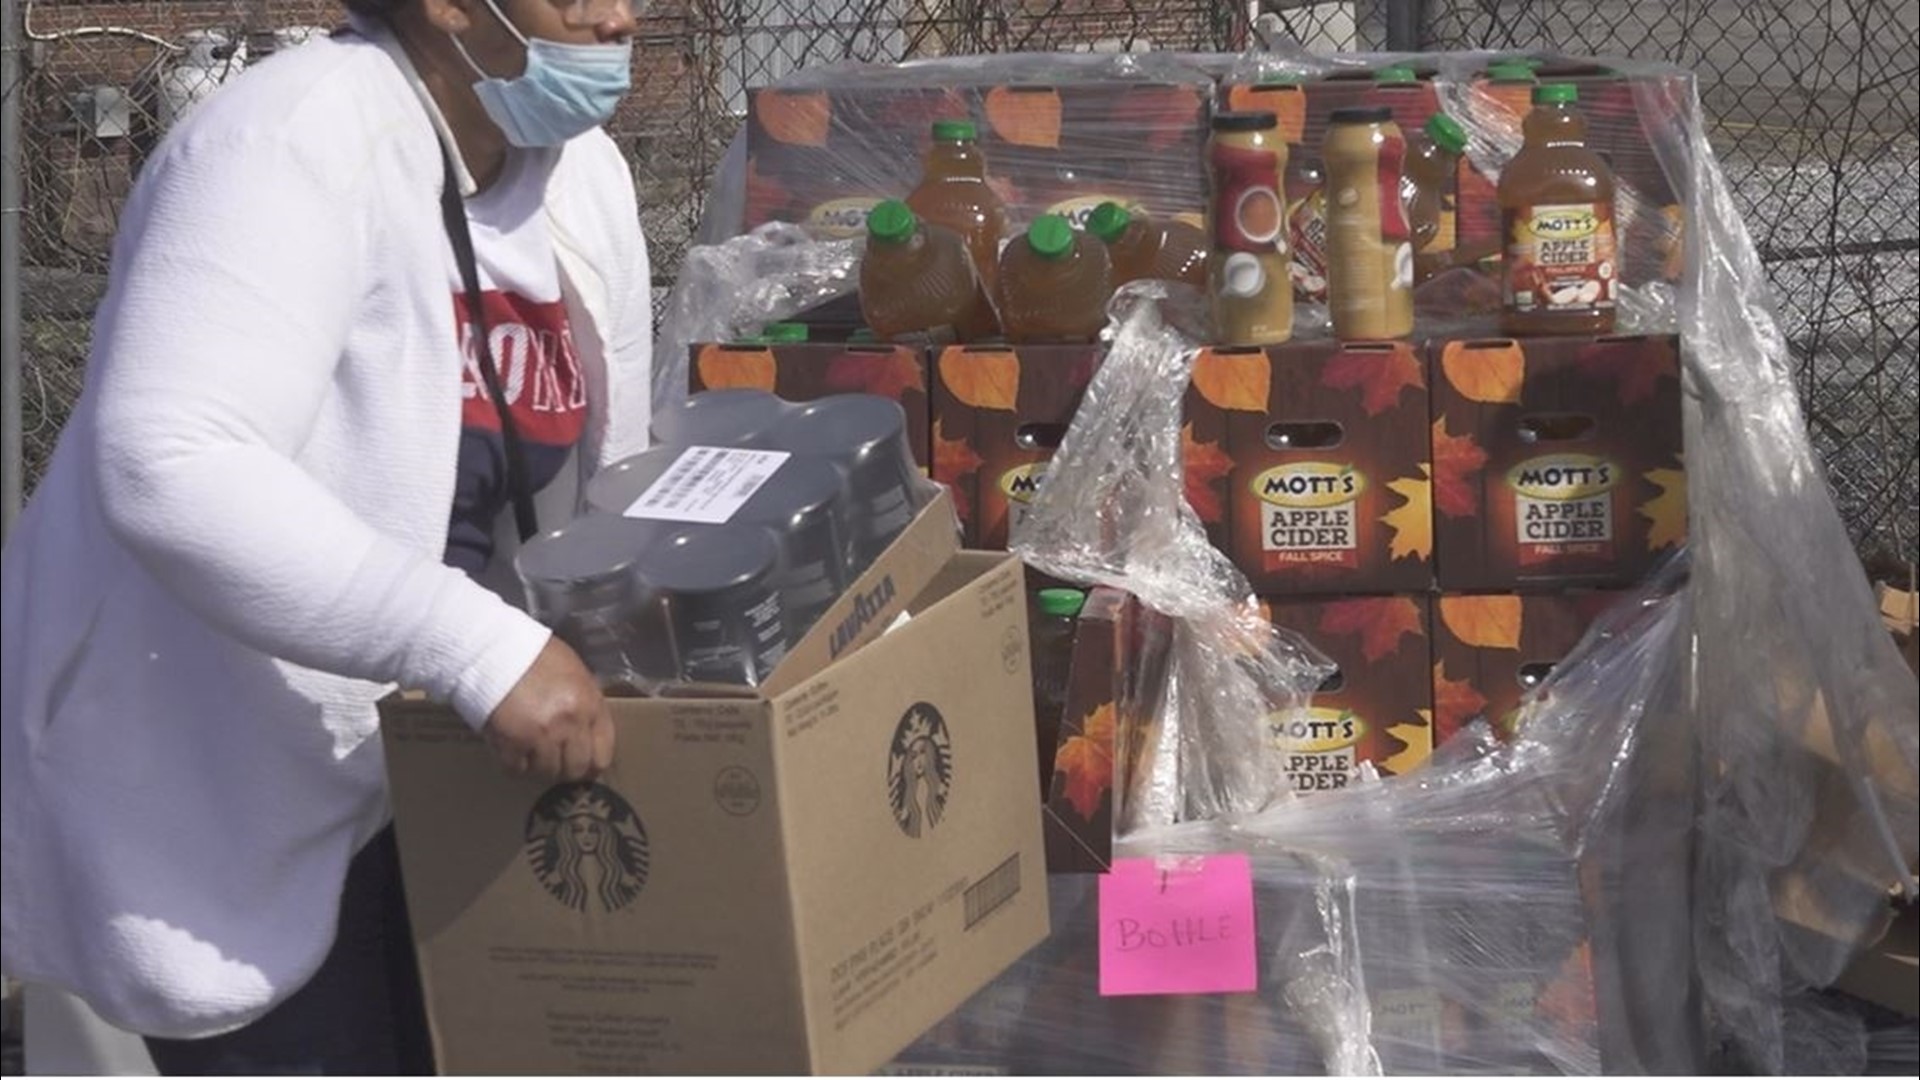 "Prices are going up for everyone. If everyone gives
a small donation, it would help," said Carleen Farabaugh of the York Benevolent Association.